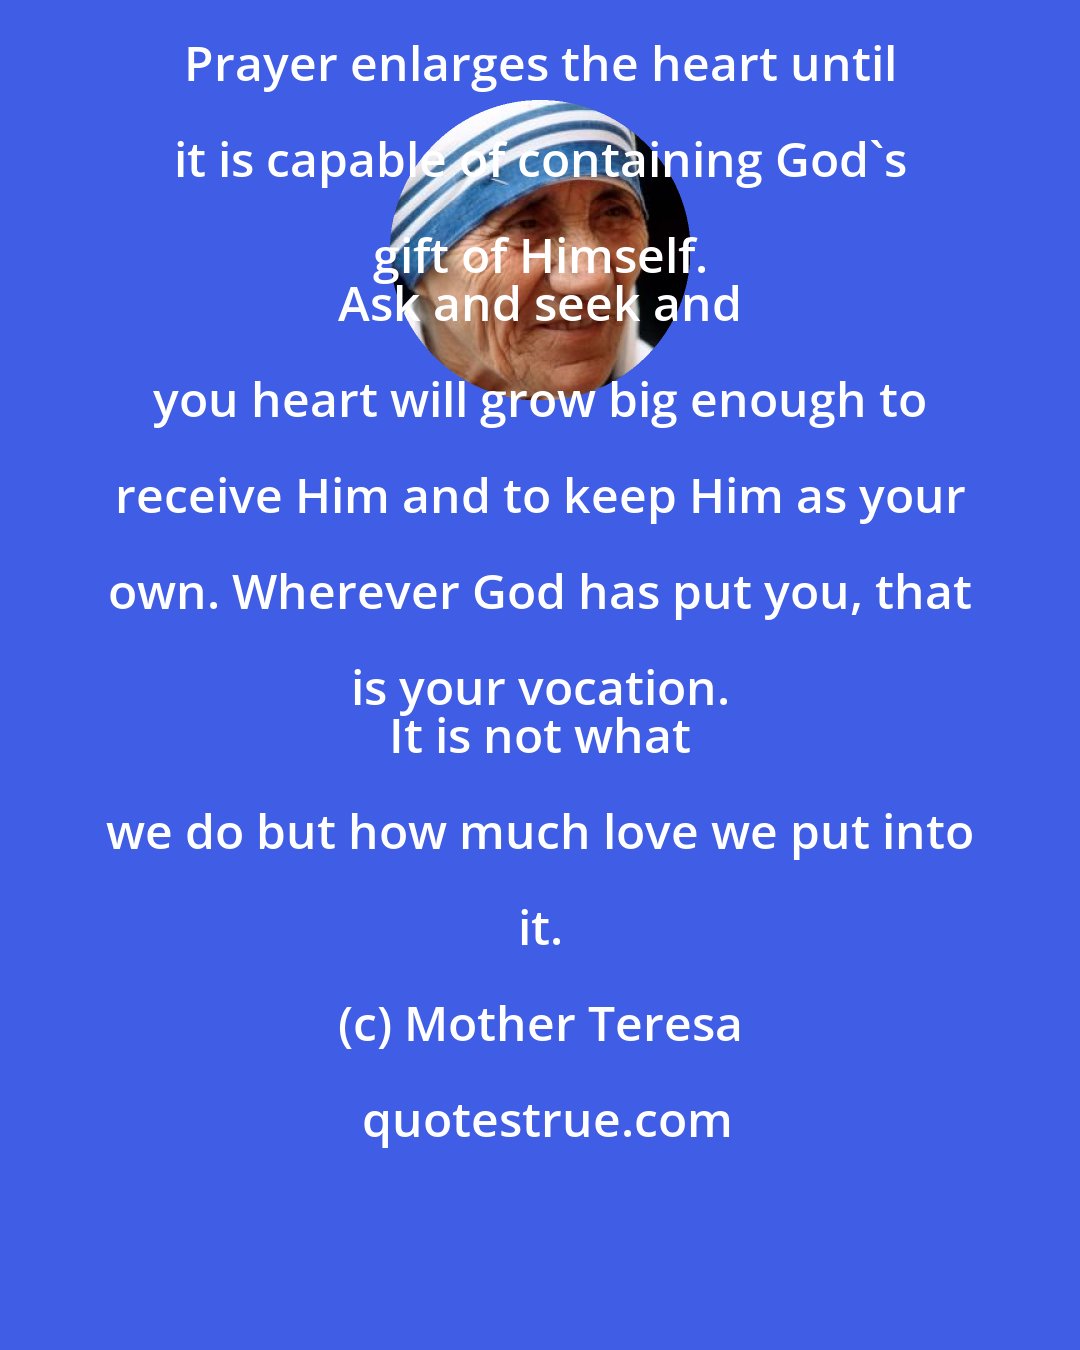 Mother Teresa: Prayer enlarges the heart until it is capable of containing God's gift of Himself. 
 Ask and seek and you heart will grow big enough to receive Him and to keep Him as your own. Wherever God has put you, that is your vocation. 
 It is not what we do but how much love we put into it.